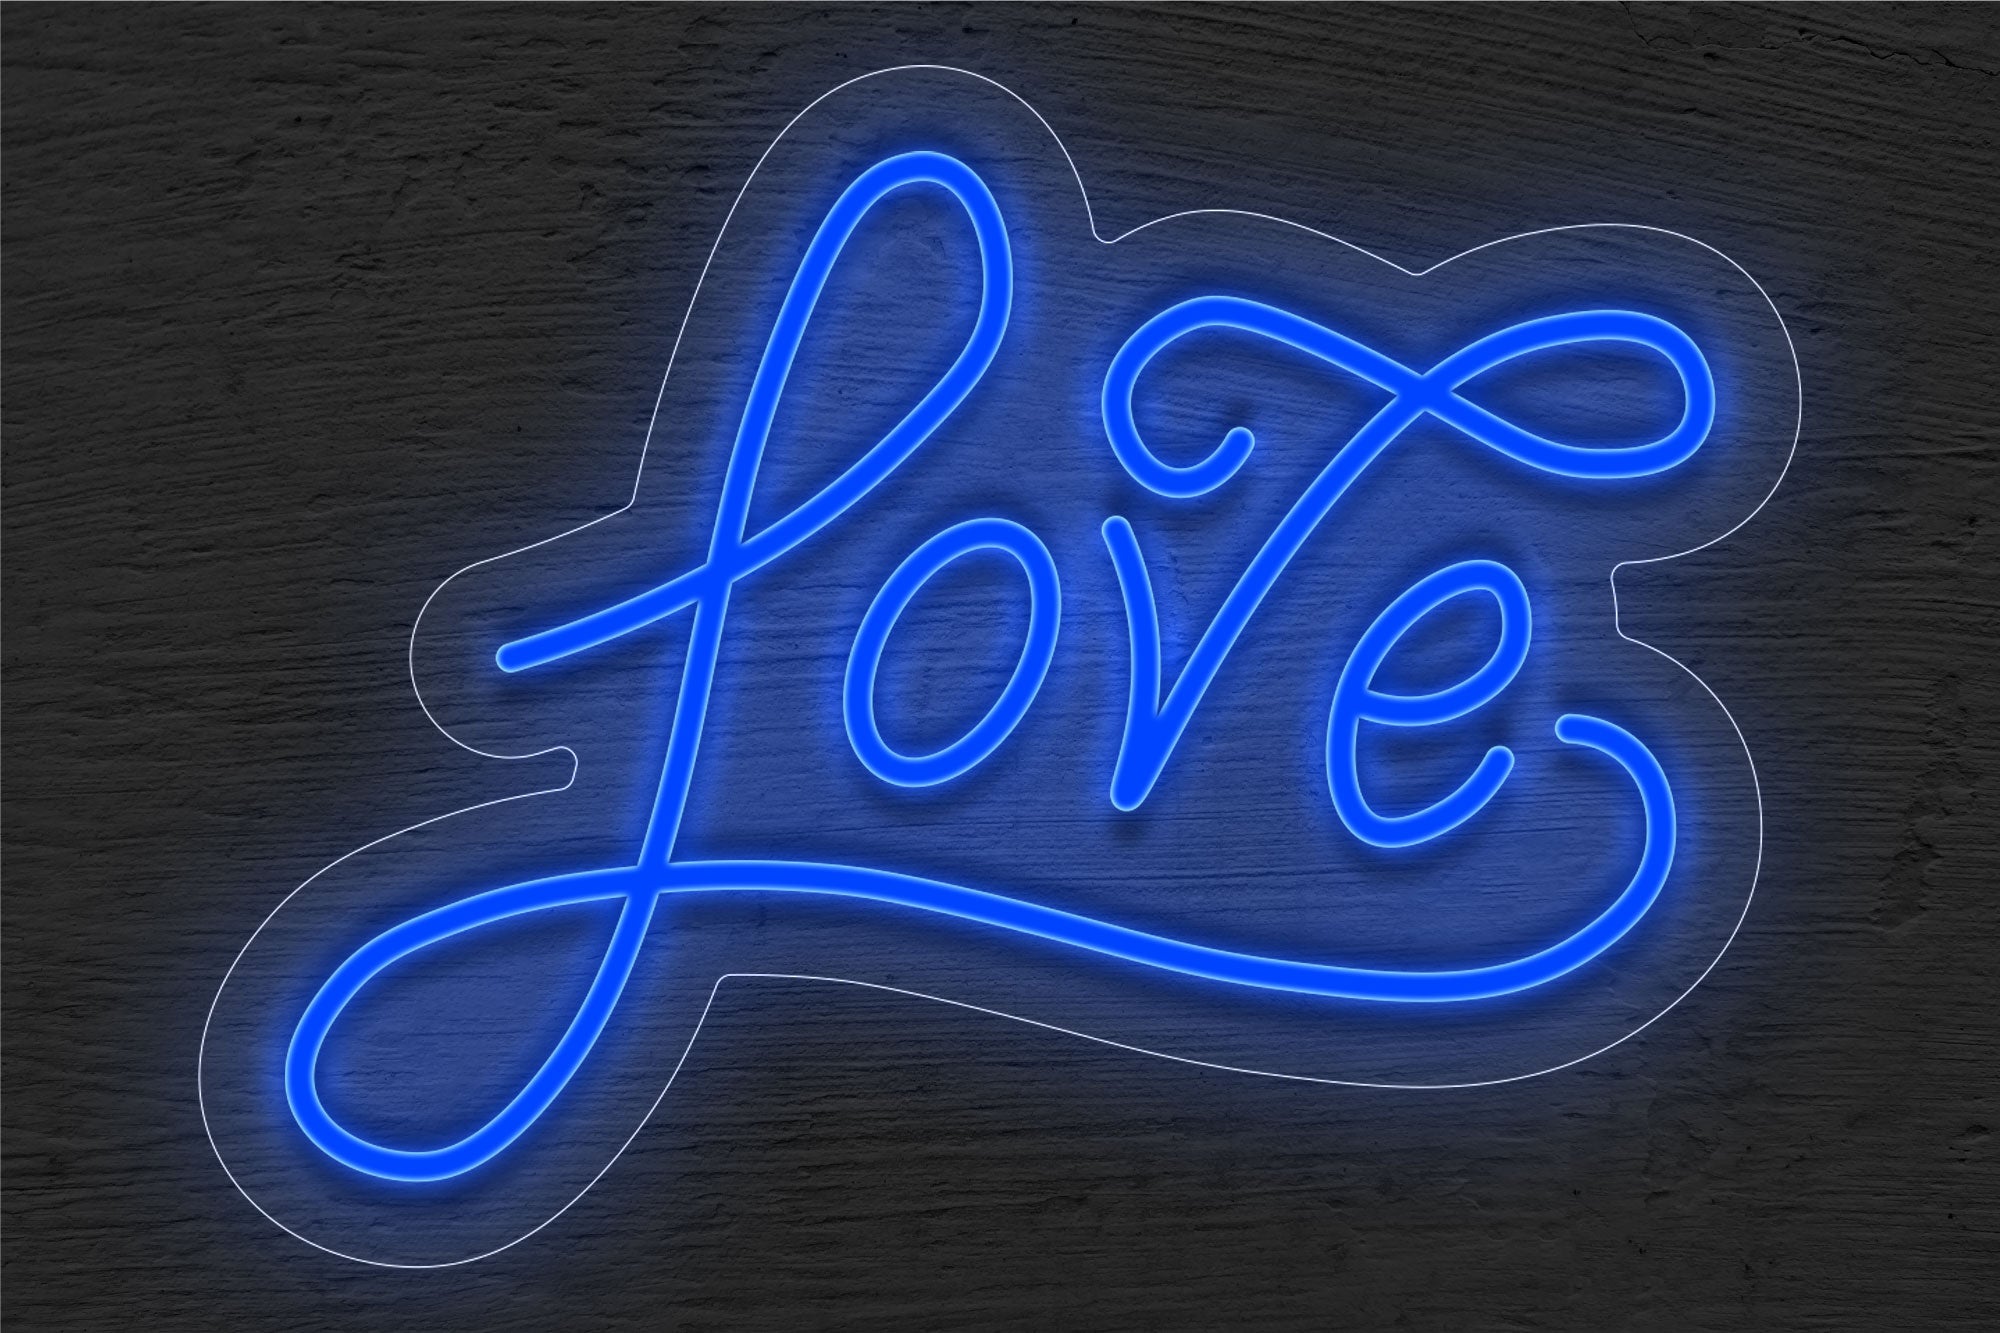 "Love" LED Neon Sign